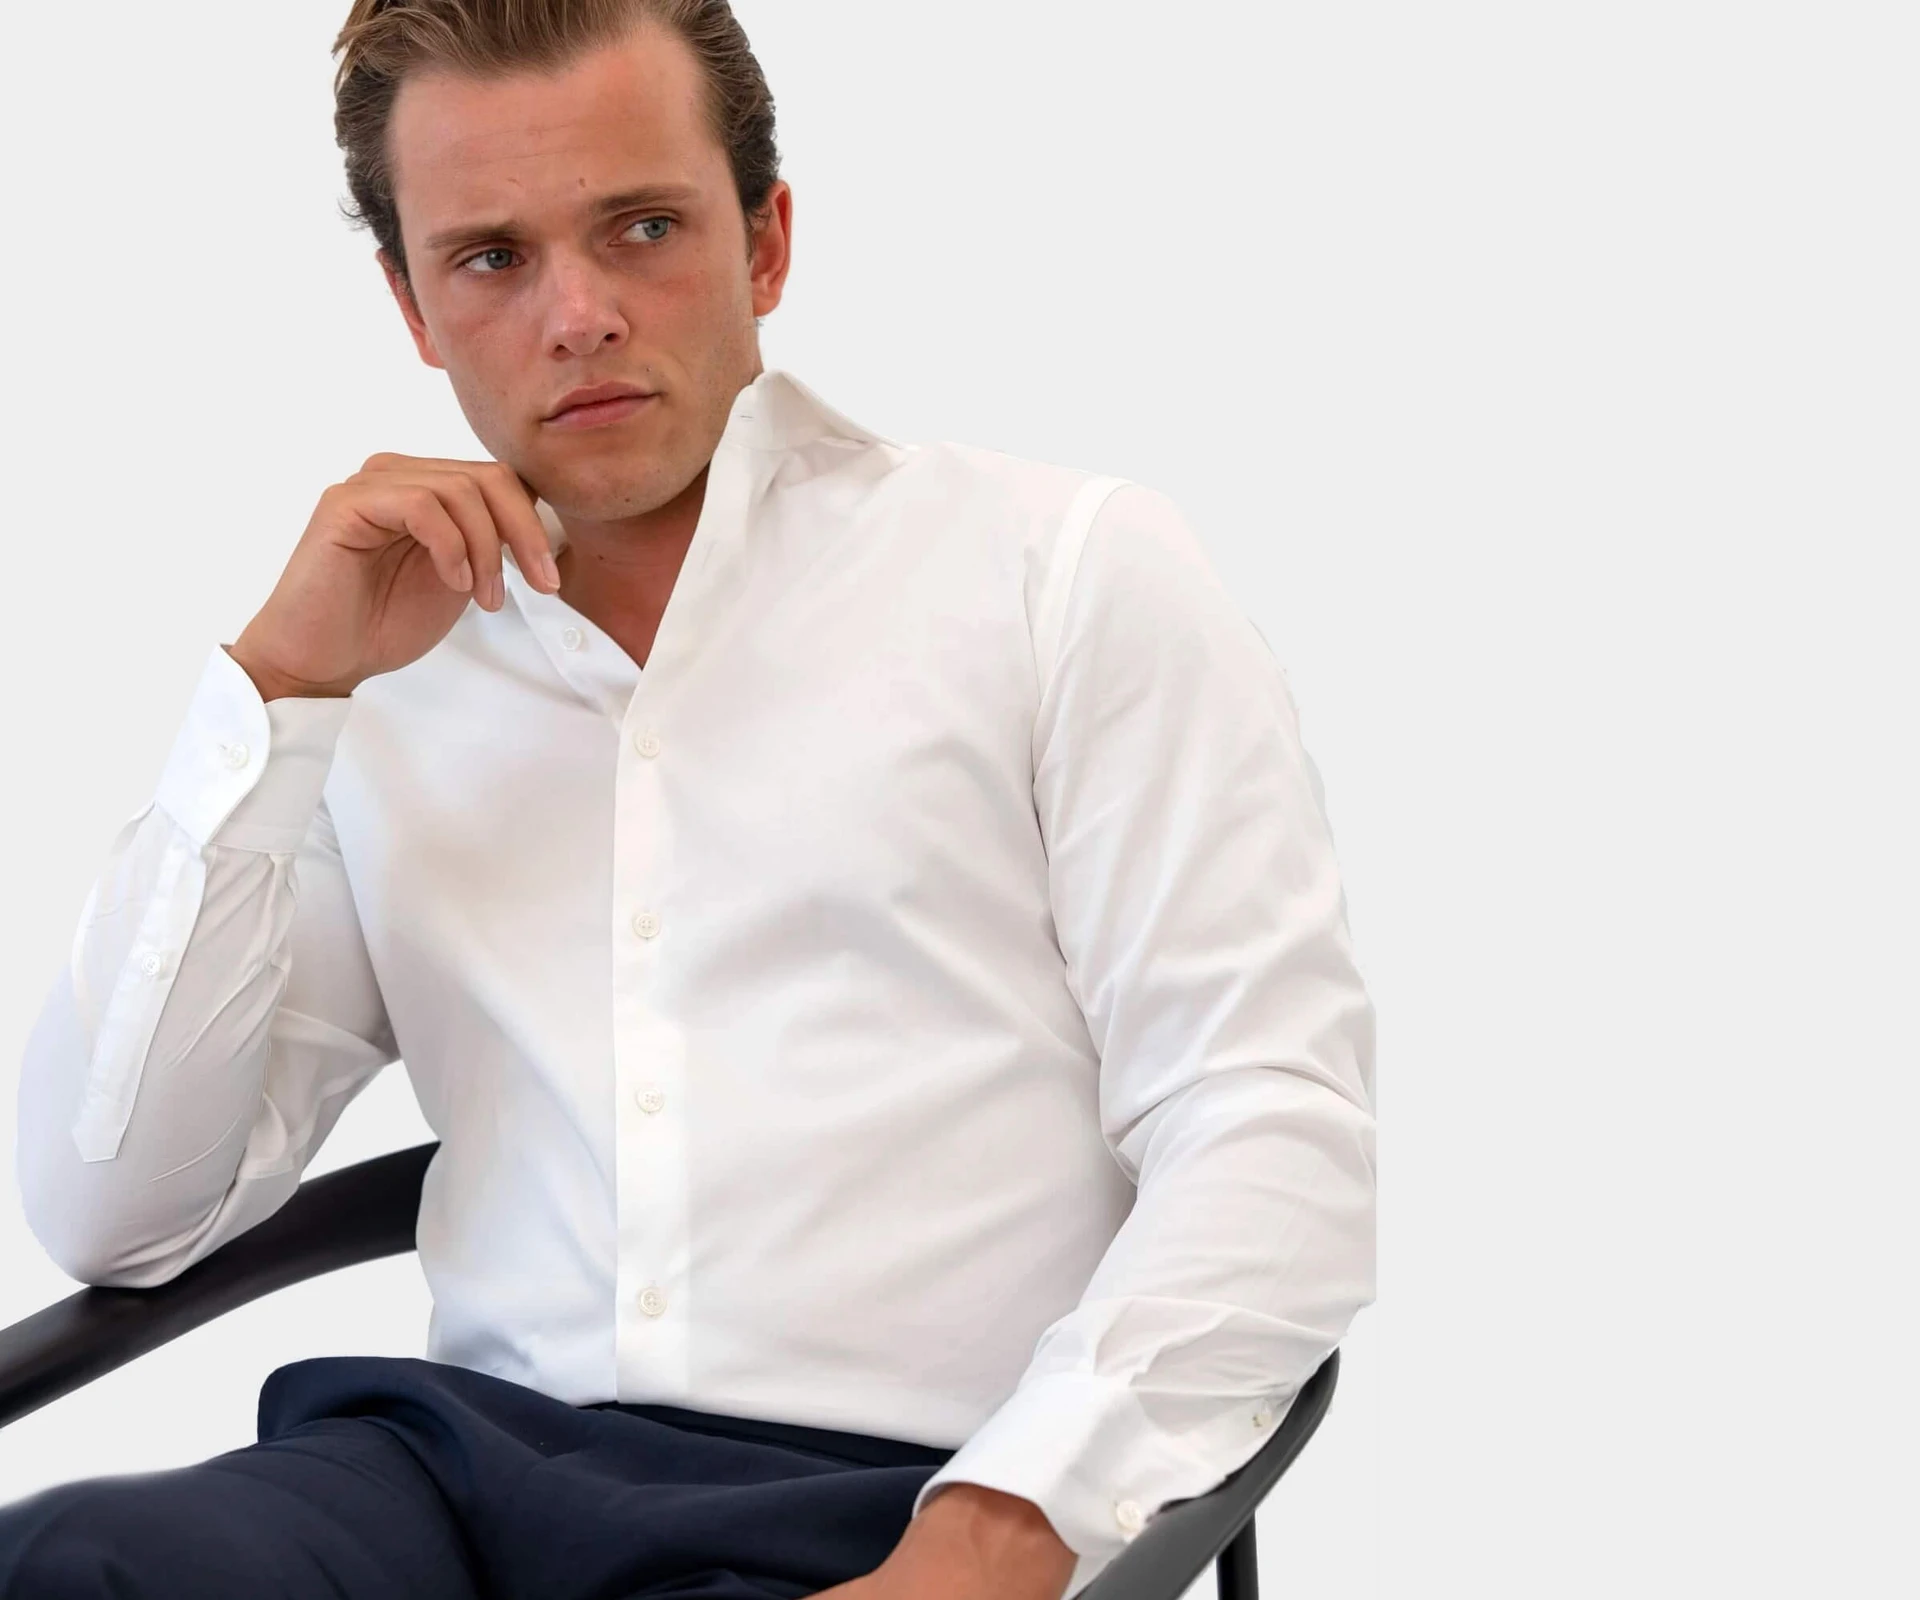 Man sitting in a tailored white shirt